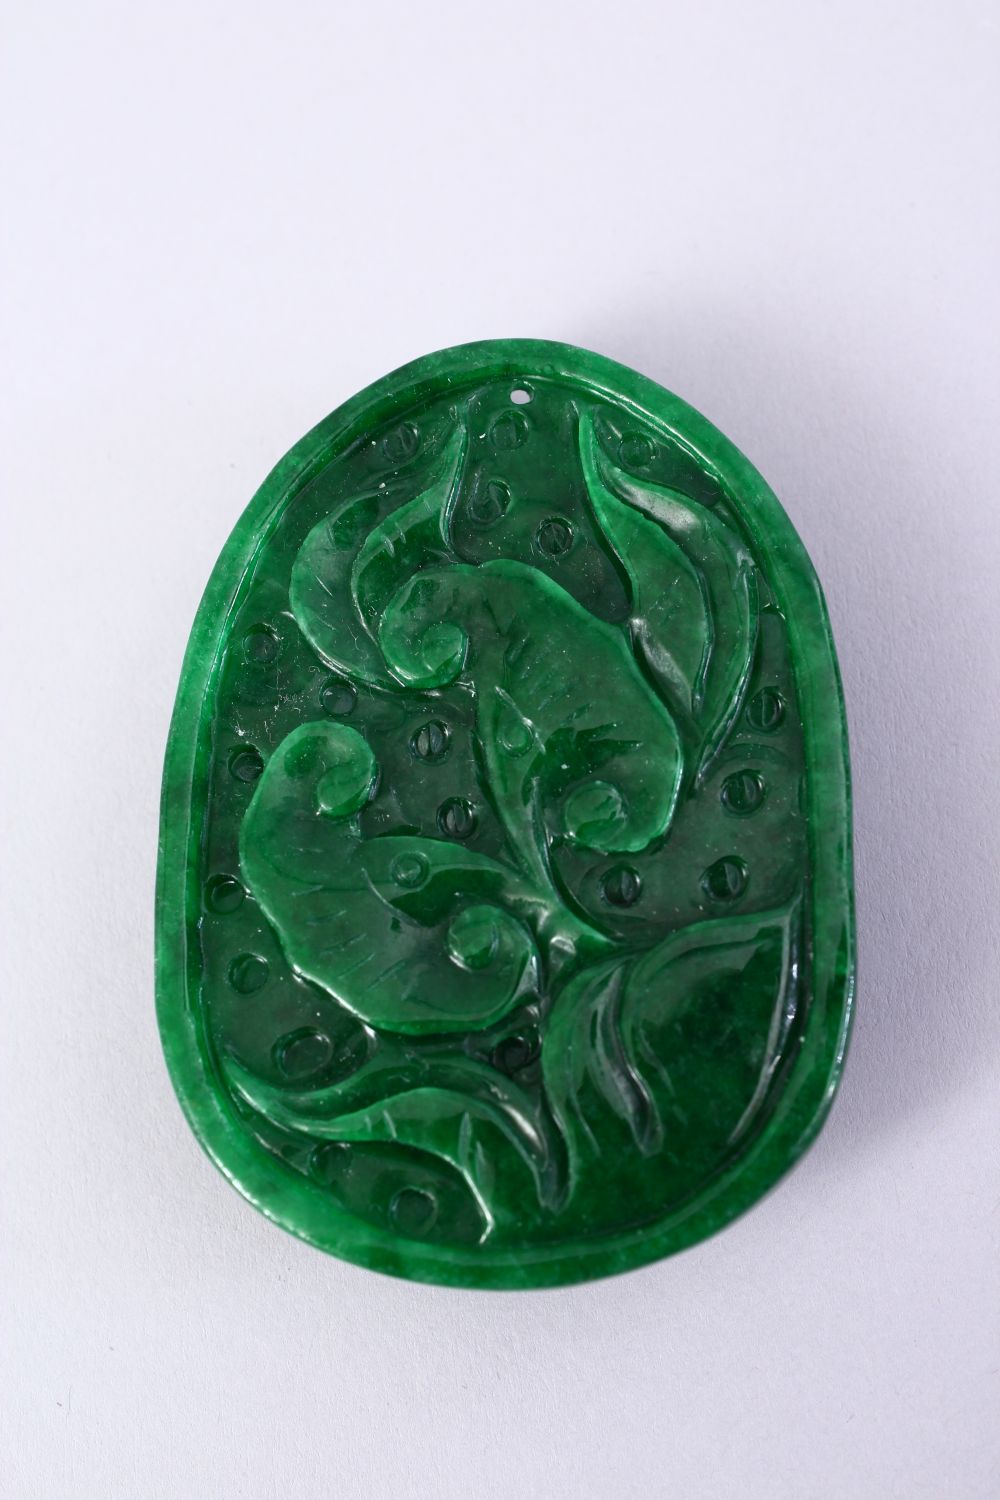 A CHINESE CARVED JADE LION DOG PENDANT, 7CM. - Image 3 of 3